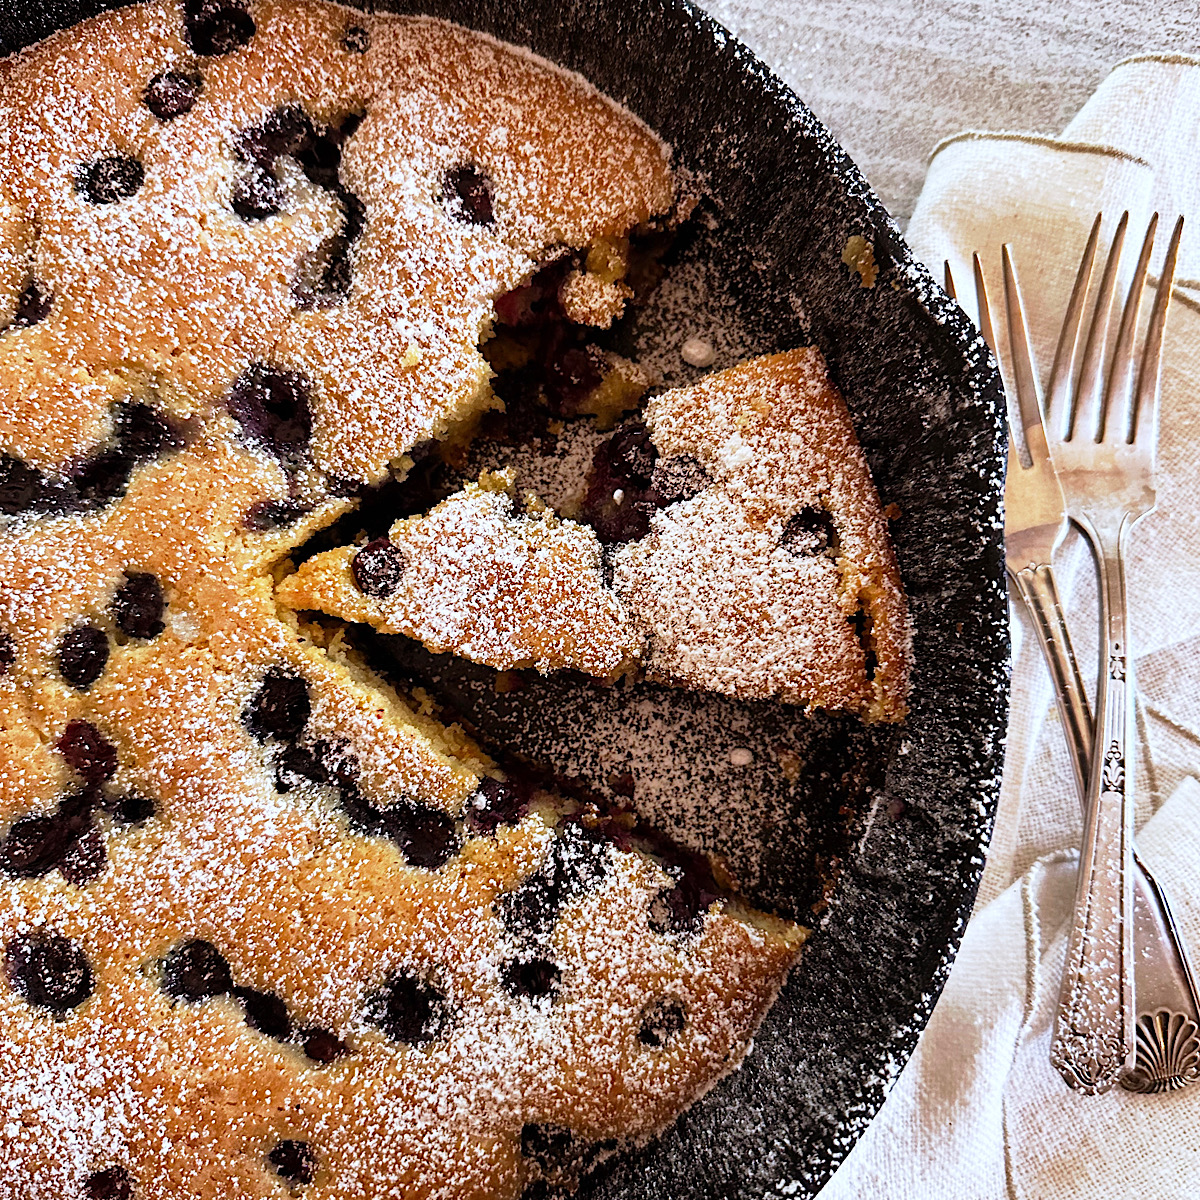 Blueberry cornmeal cake in a black skillet with a side of 2 forks.